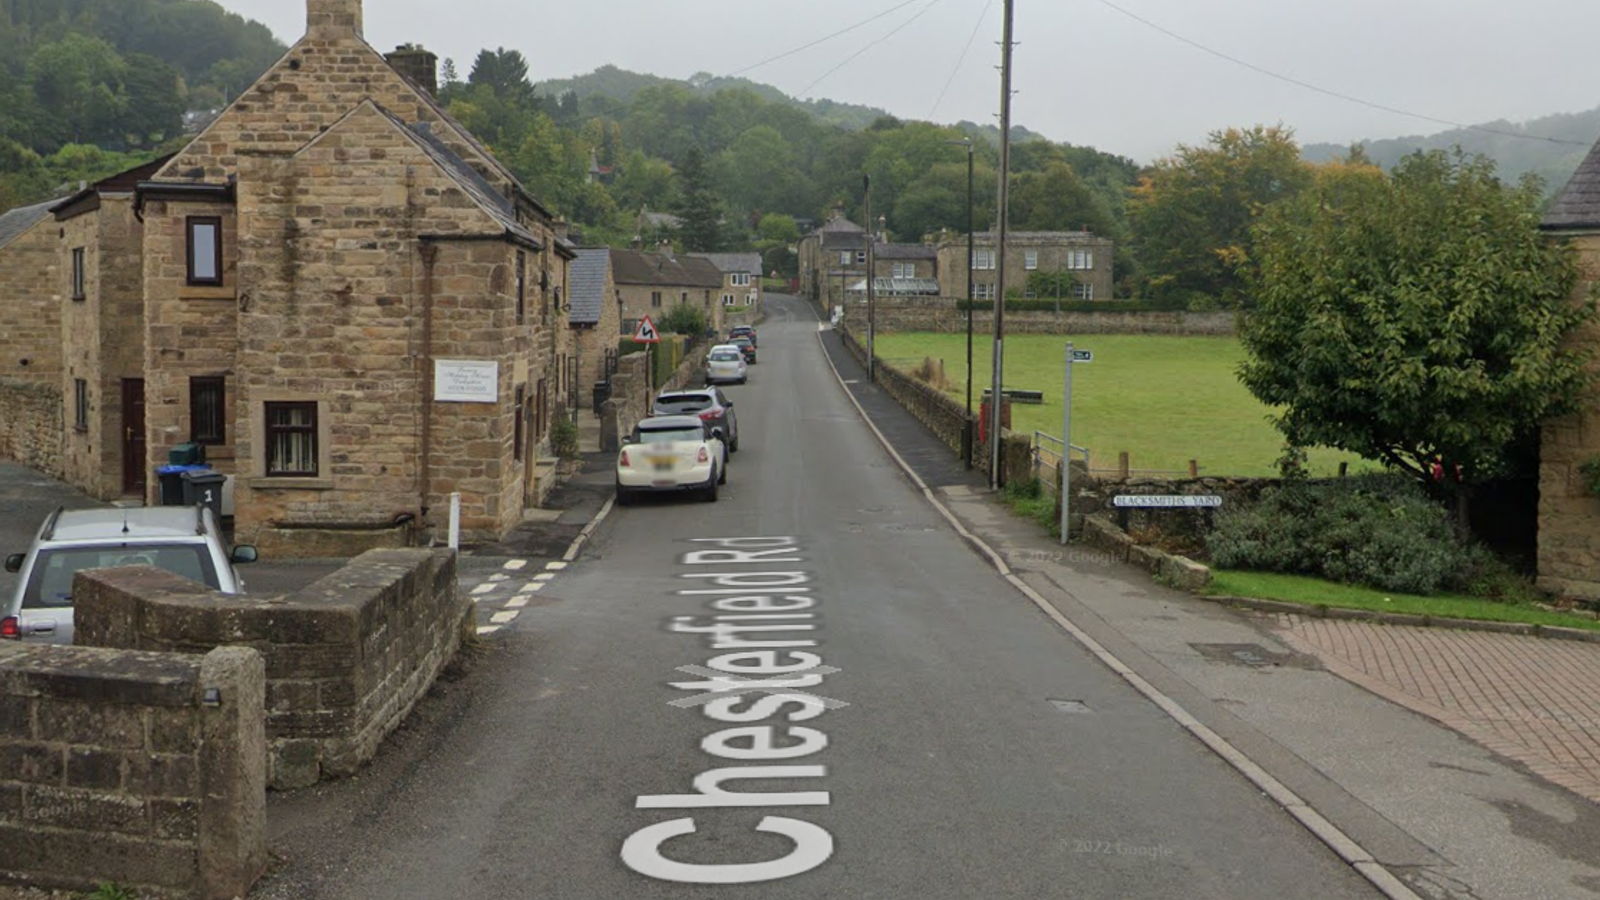 Mother and son killed in Derbyshire crash as police hunt BMW driver